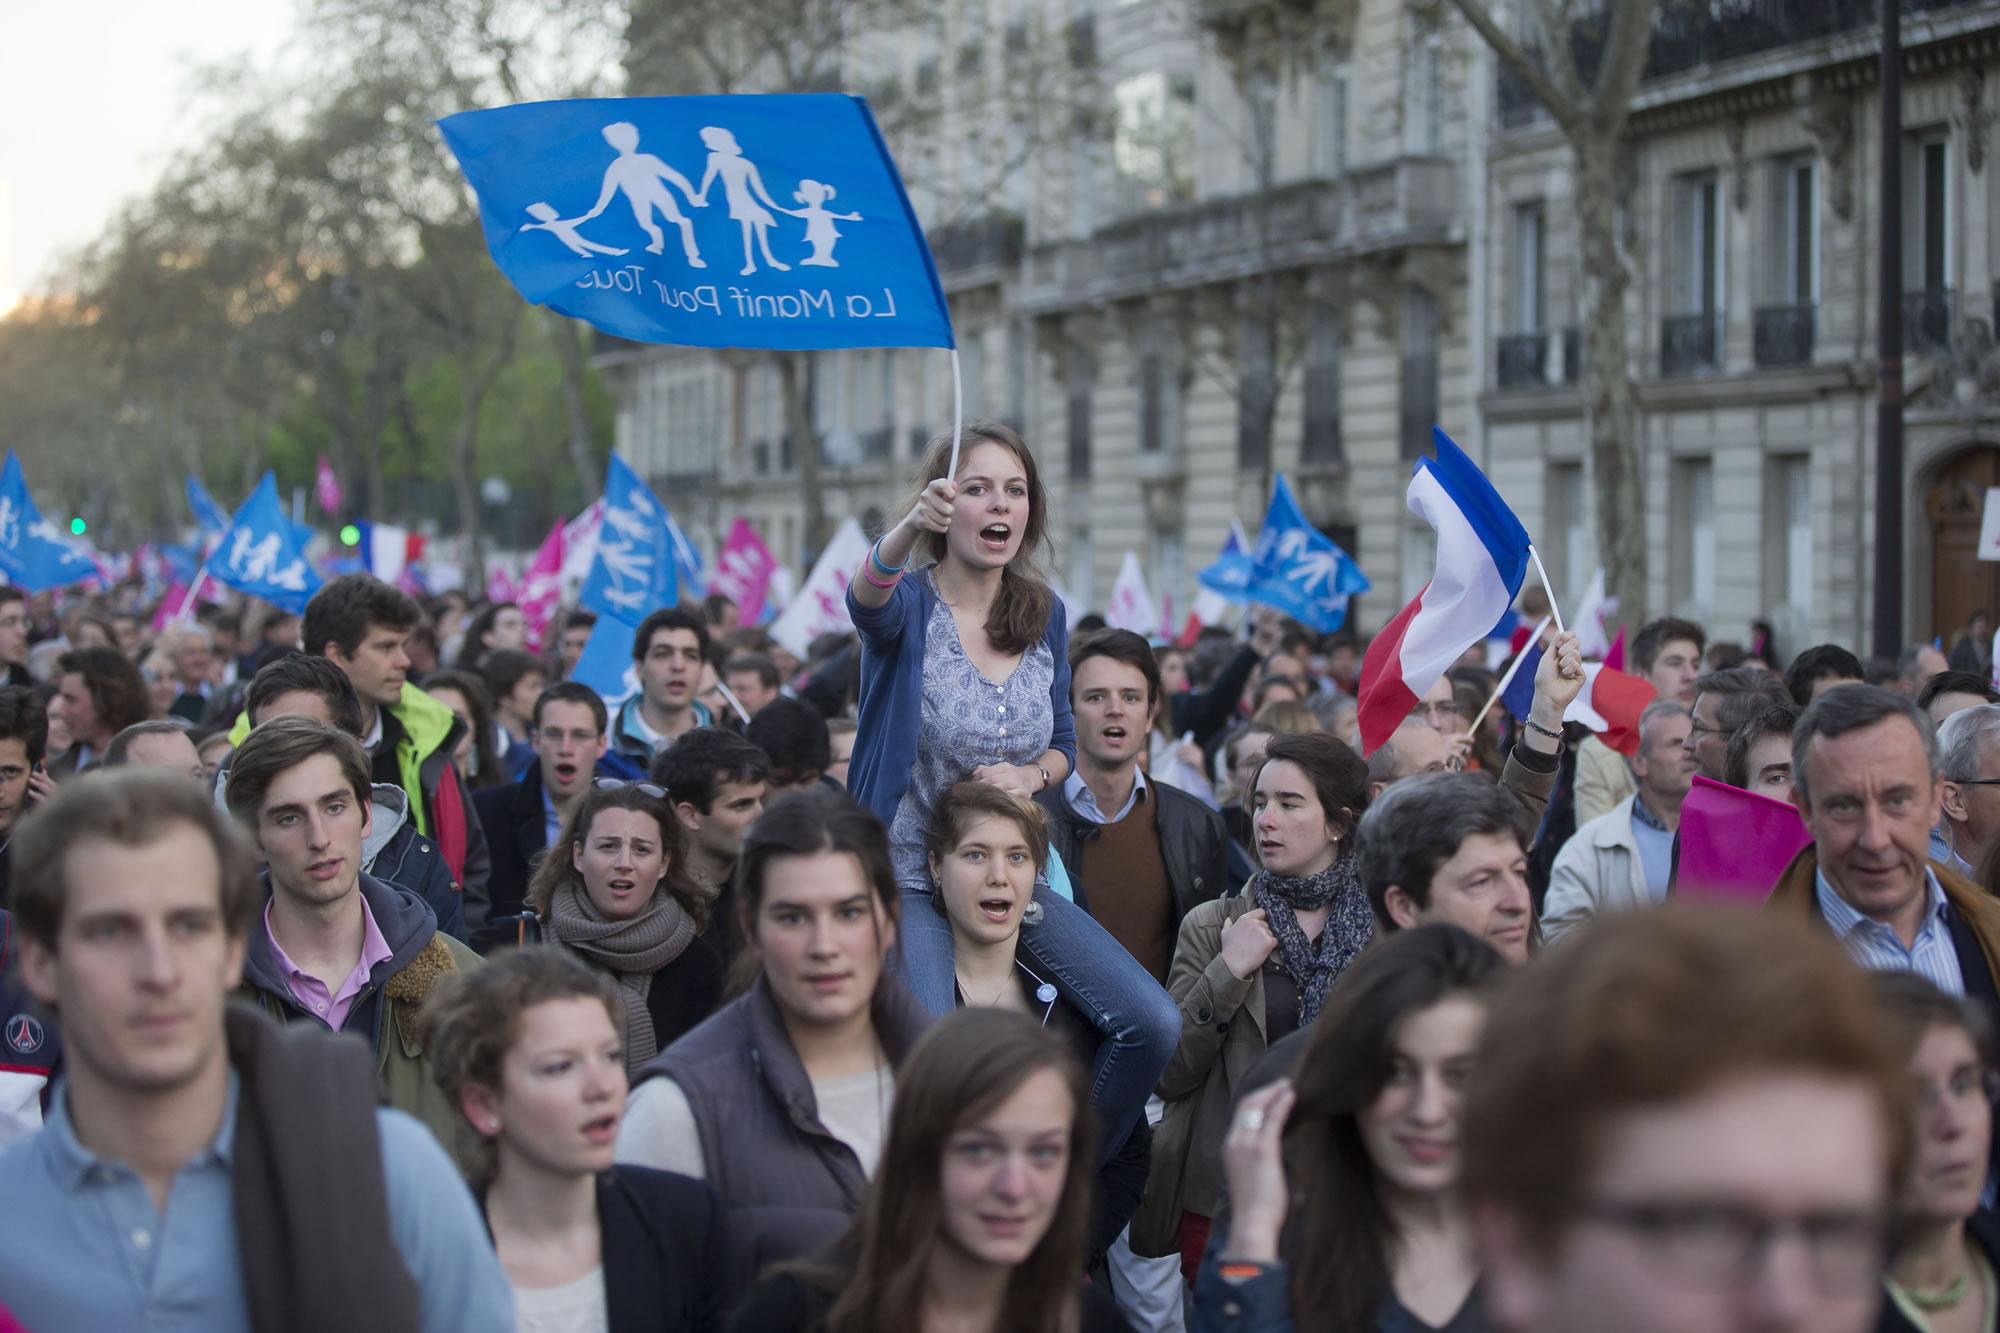 An anti-gay marriage activist waves a flag with the logo of the movement on it during a rally to protest against the new law after French lawmakers legalized same-sex marriage on Tuesday in Paris.